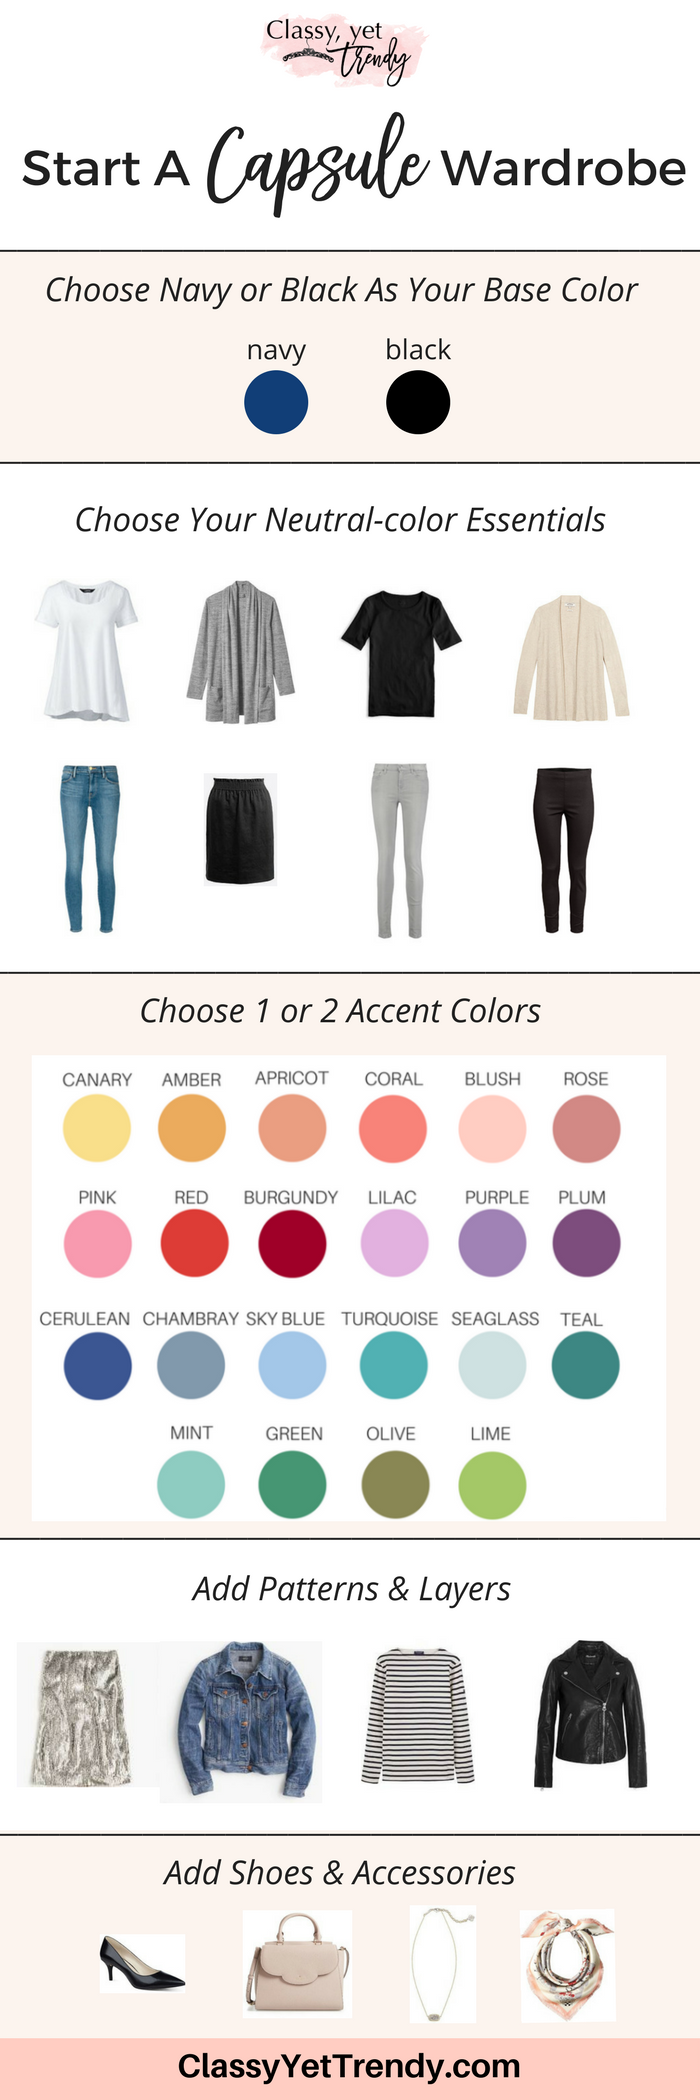 How To Start A Capsule Wardrobe 5 Step Visual Guide Guide Sheet Classy Yet Trendy